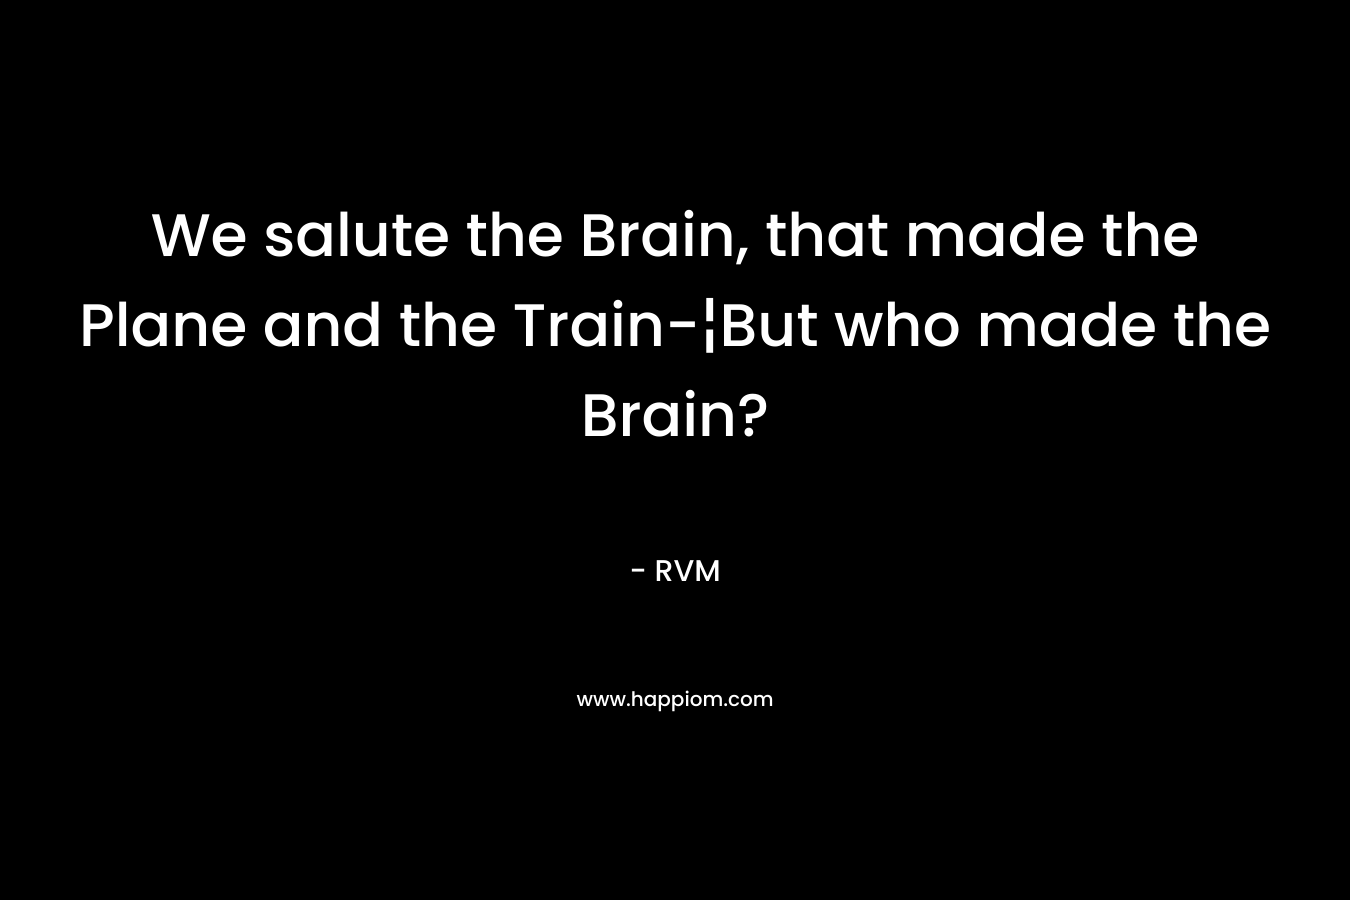 We salute the Brain, that made the Plane and the Train-¦But who made the Brain?